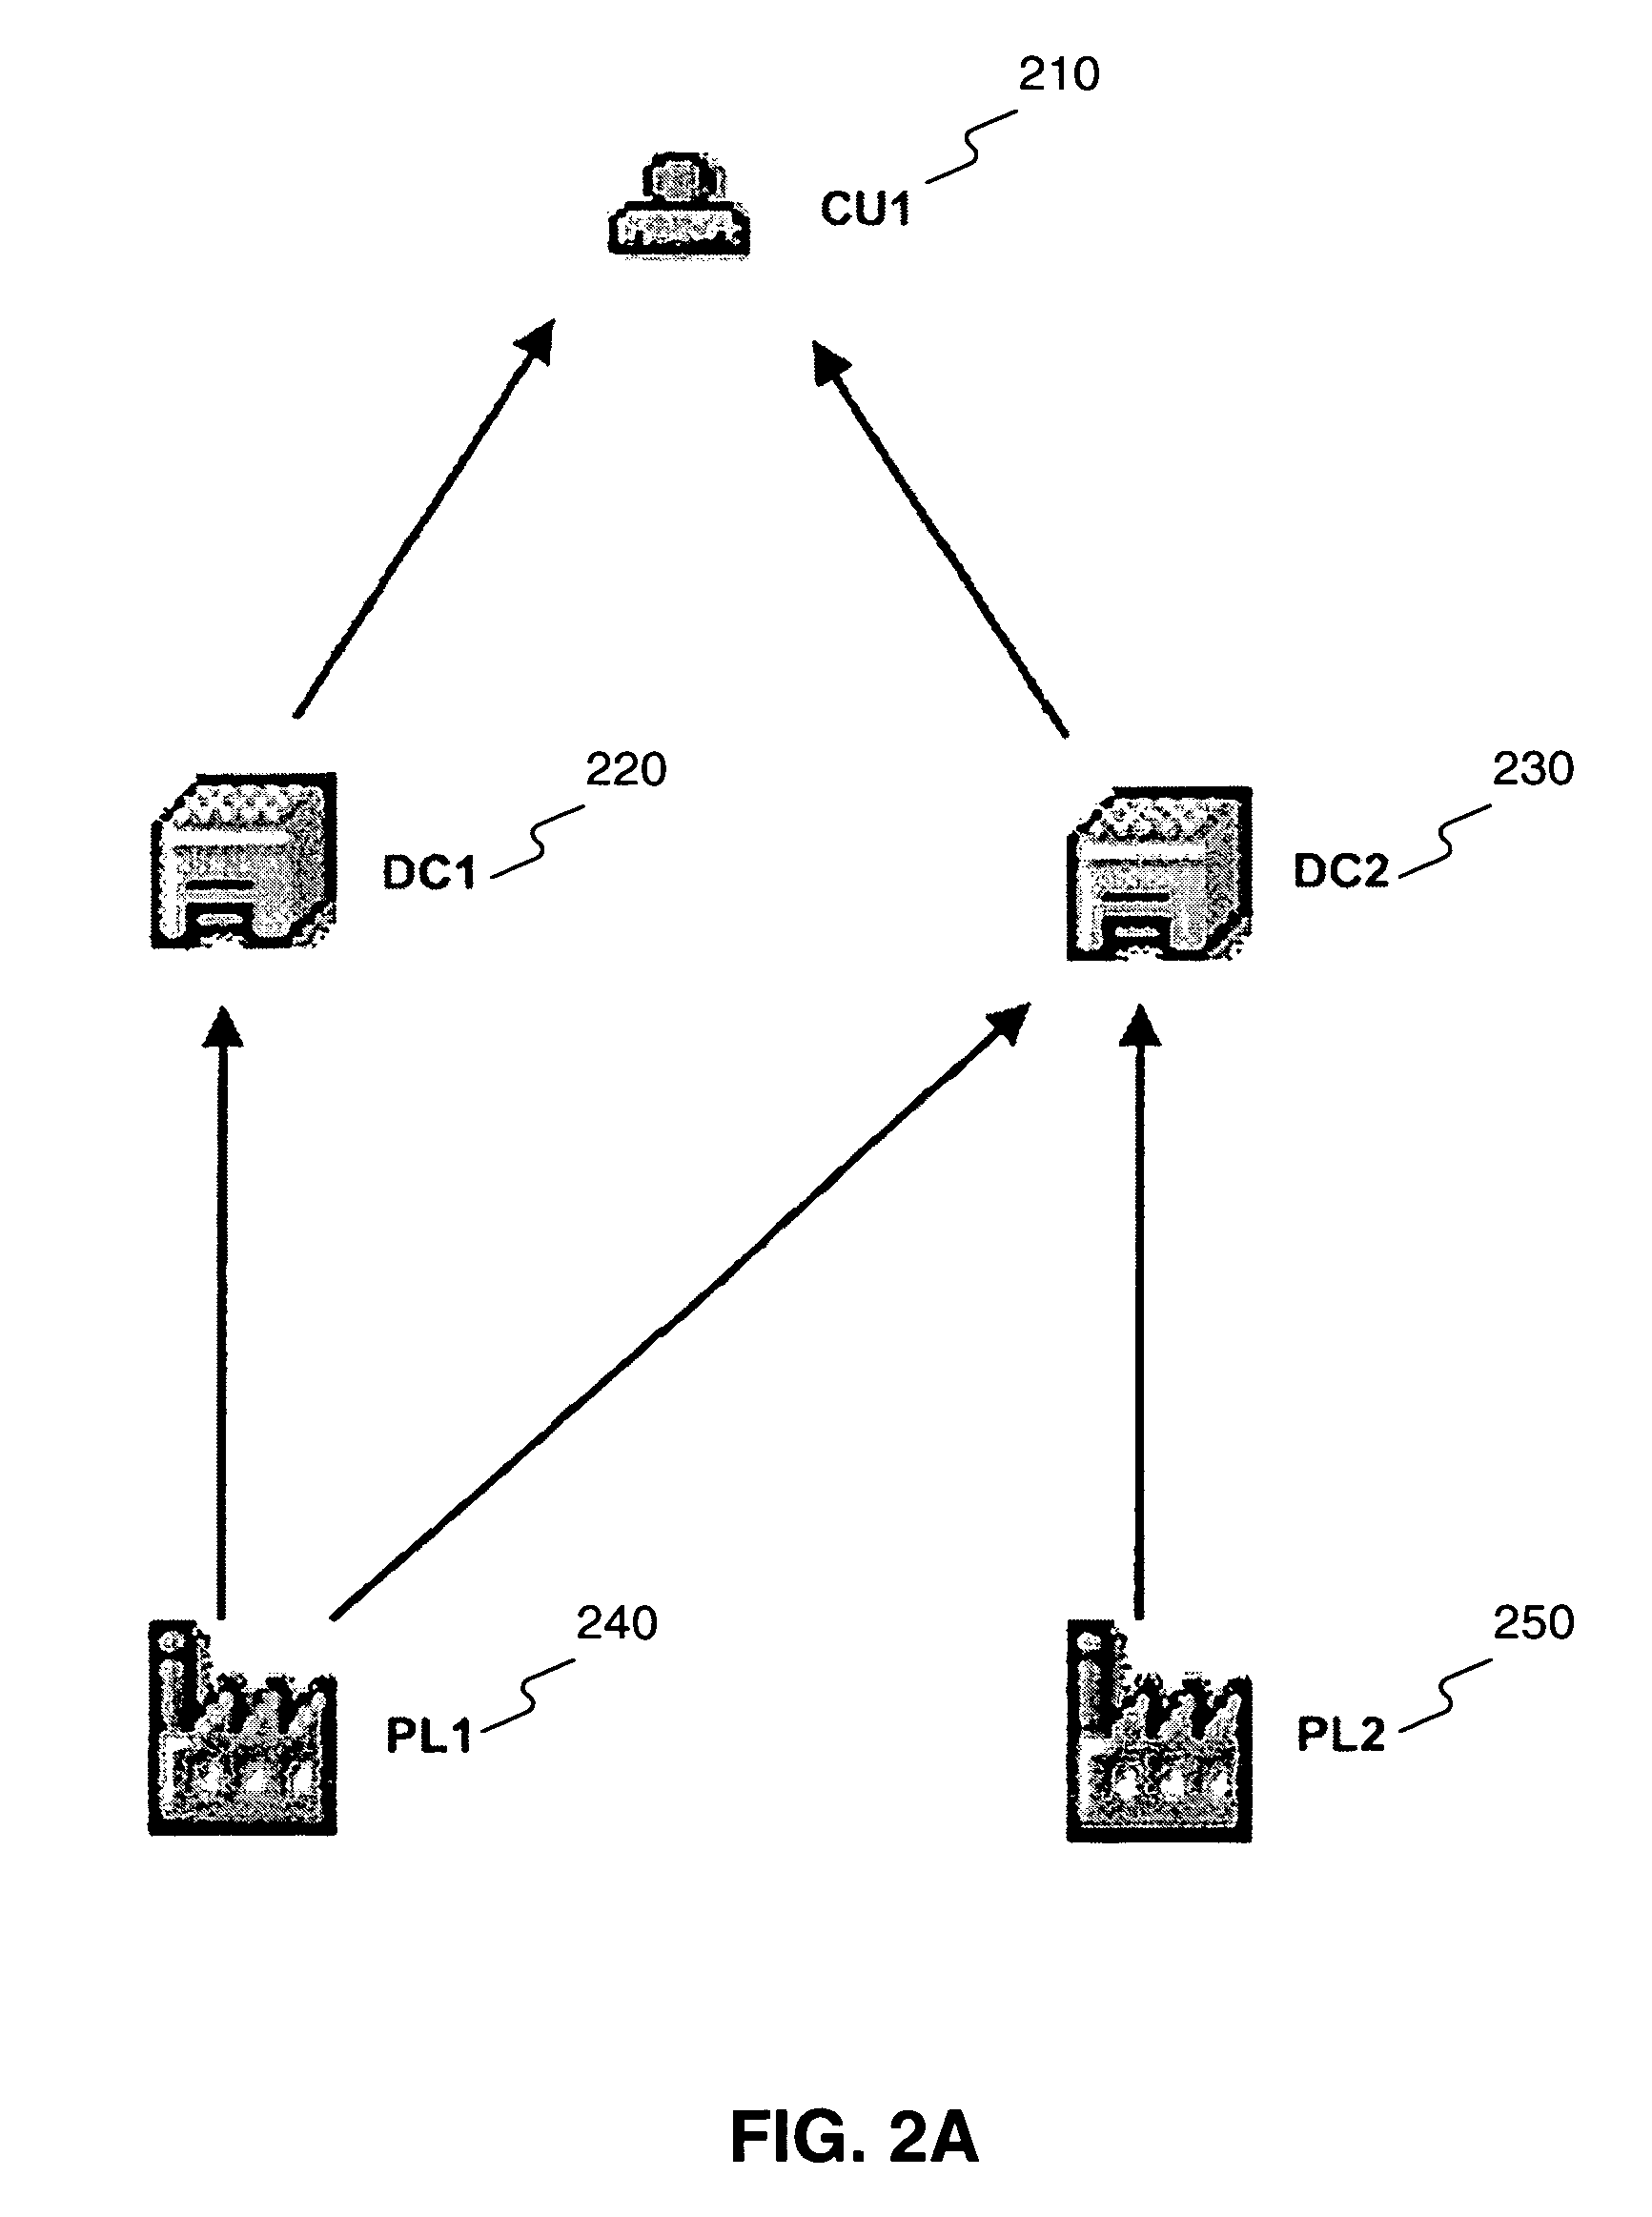 Systems and methods for automated parallelization of deployment